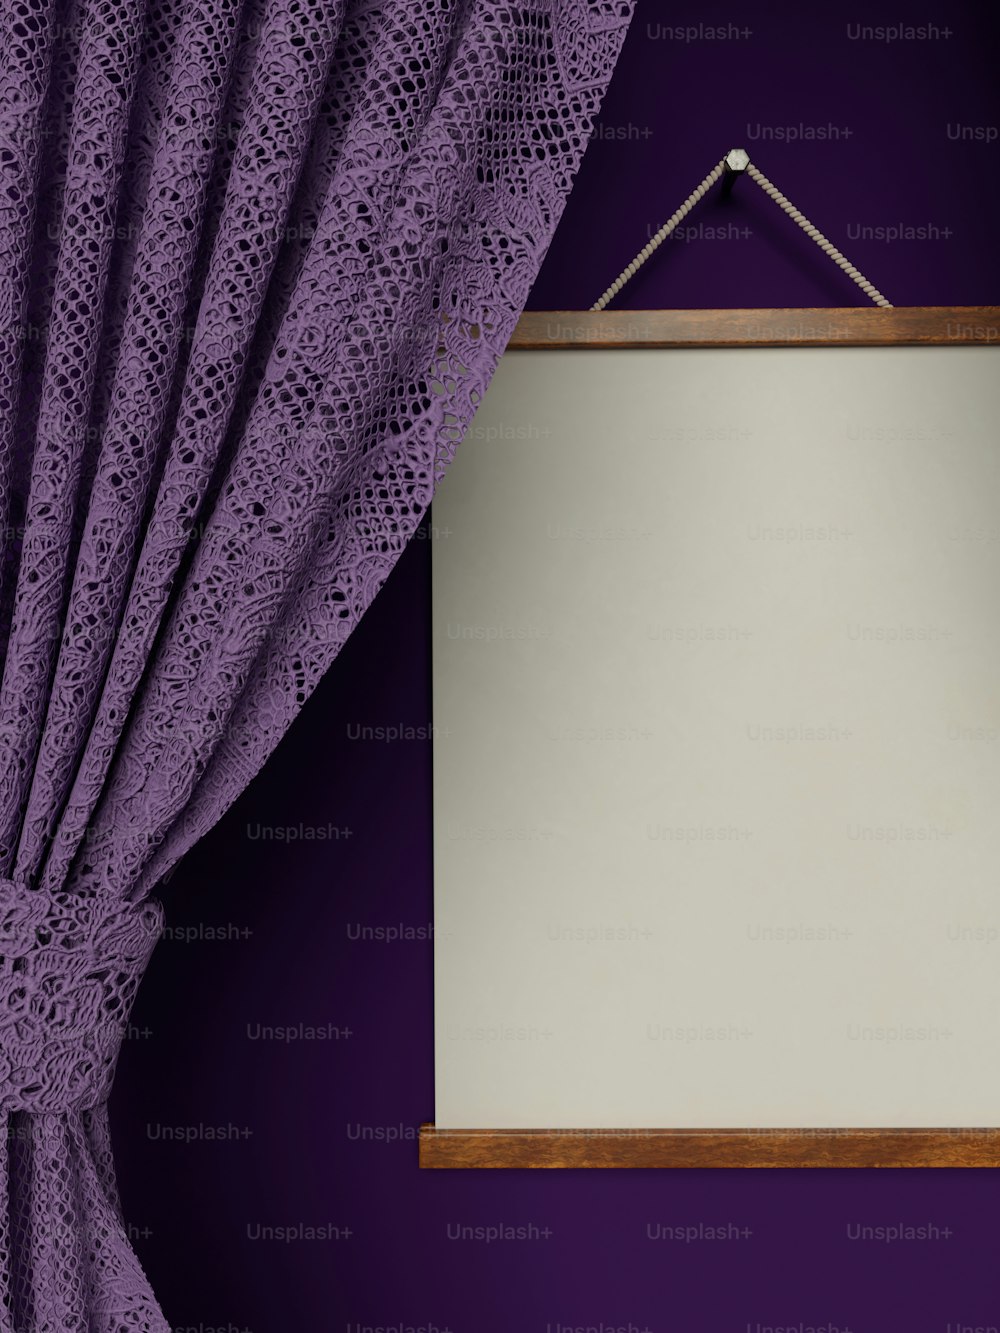 a white board hanging on a purple wall next to a purple curtain